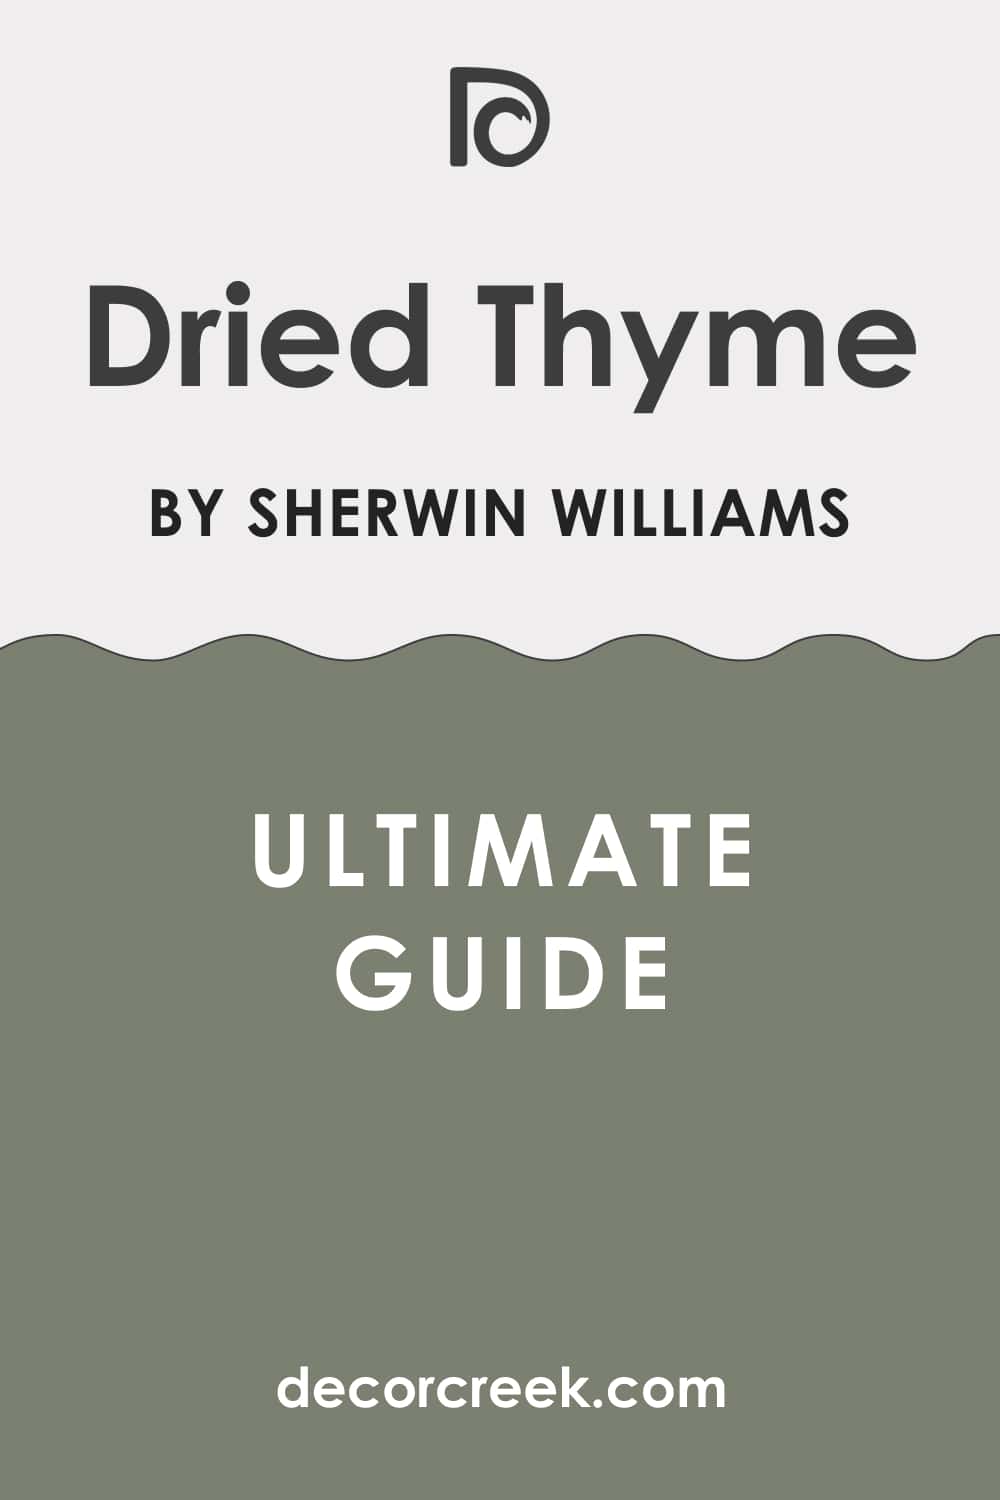 Ultimate Guide of Dried Thyme SW-6186 